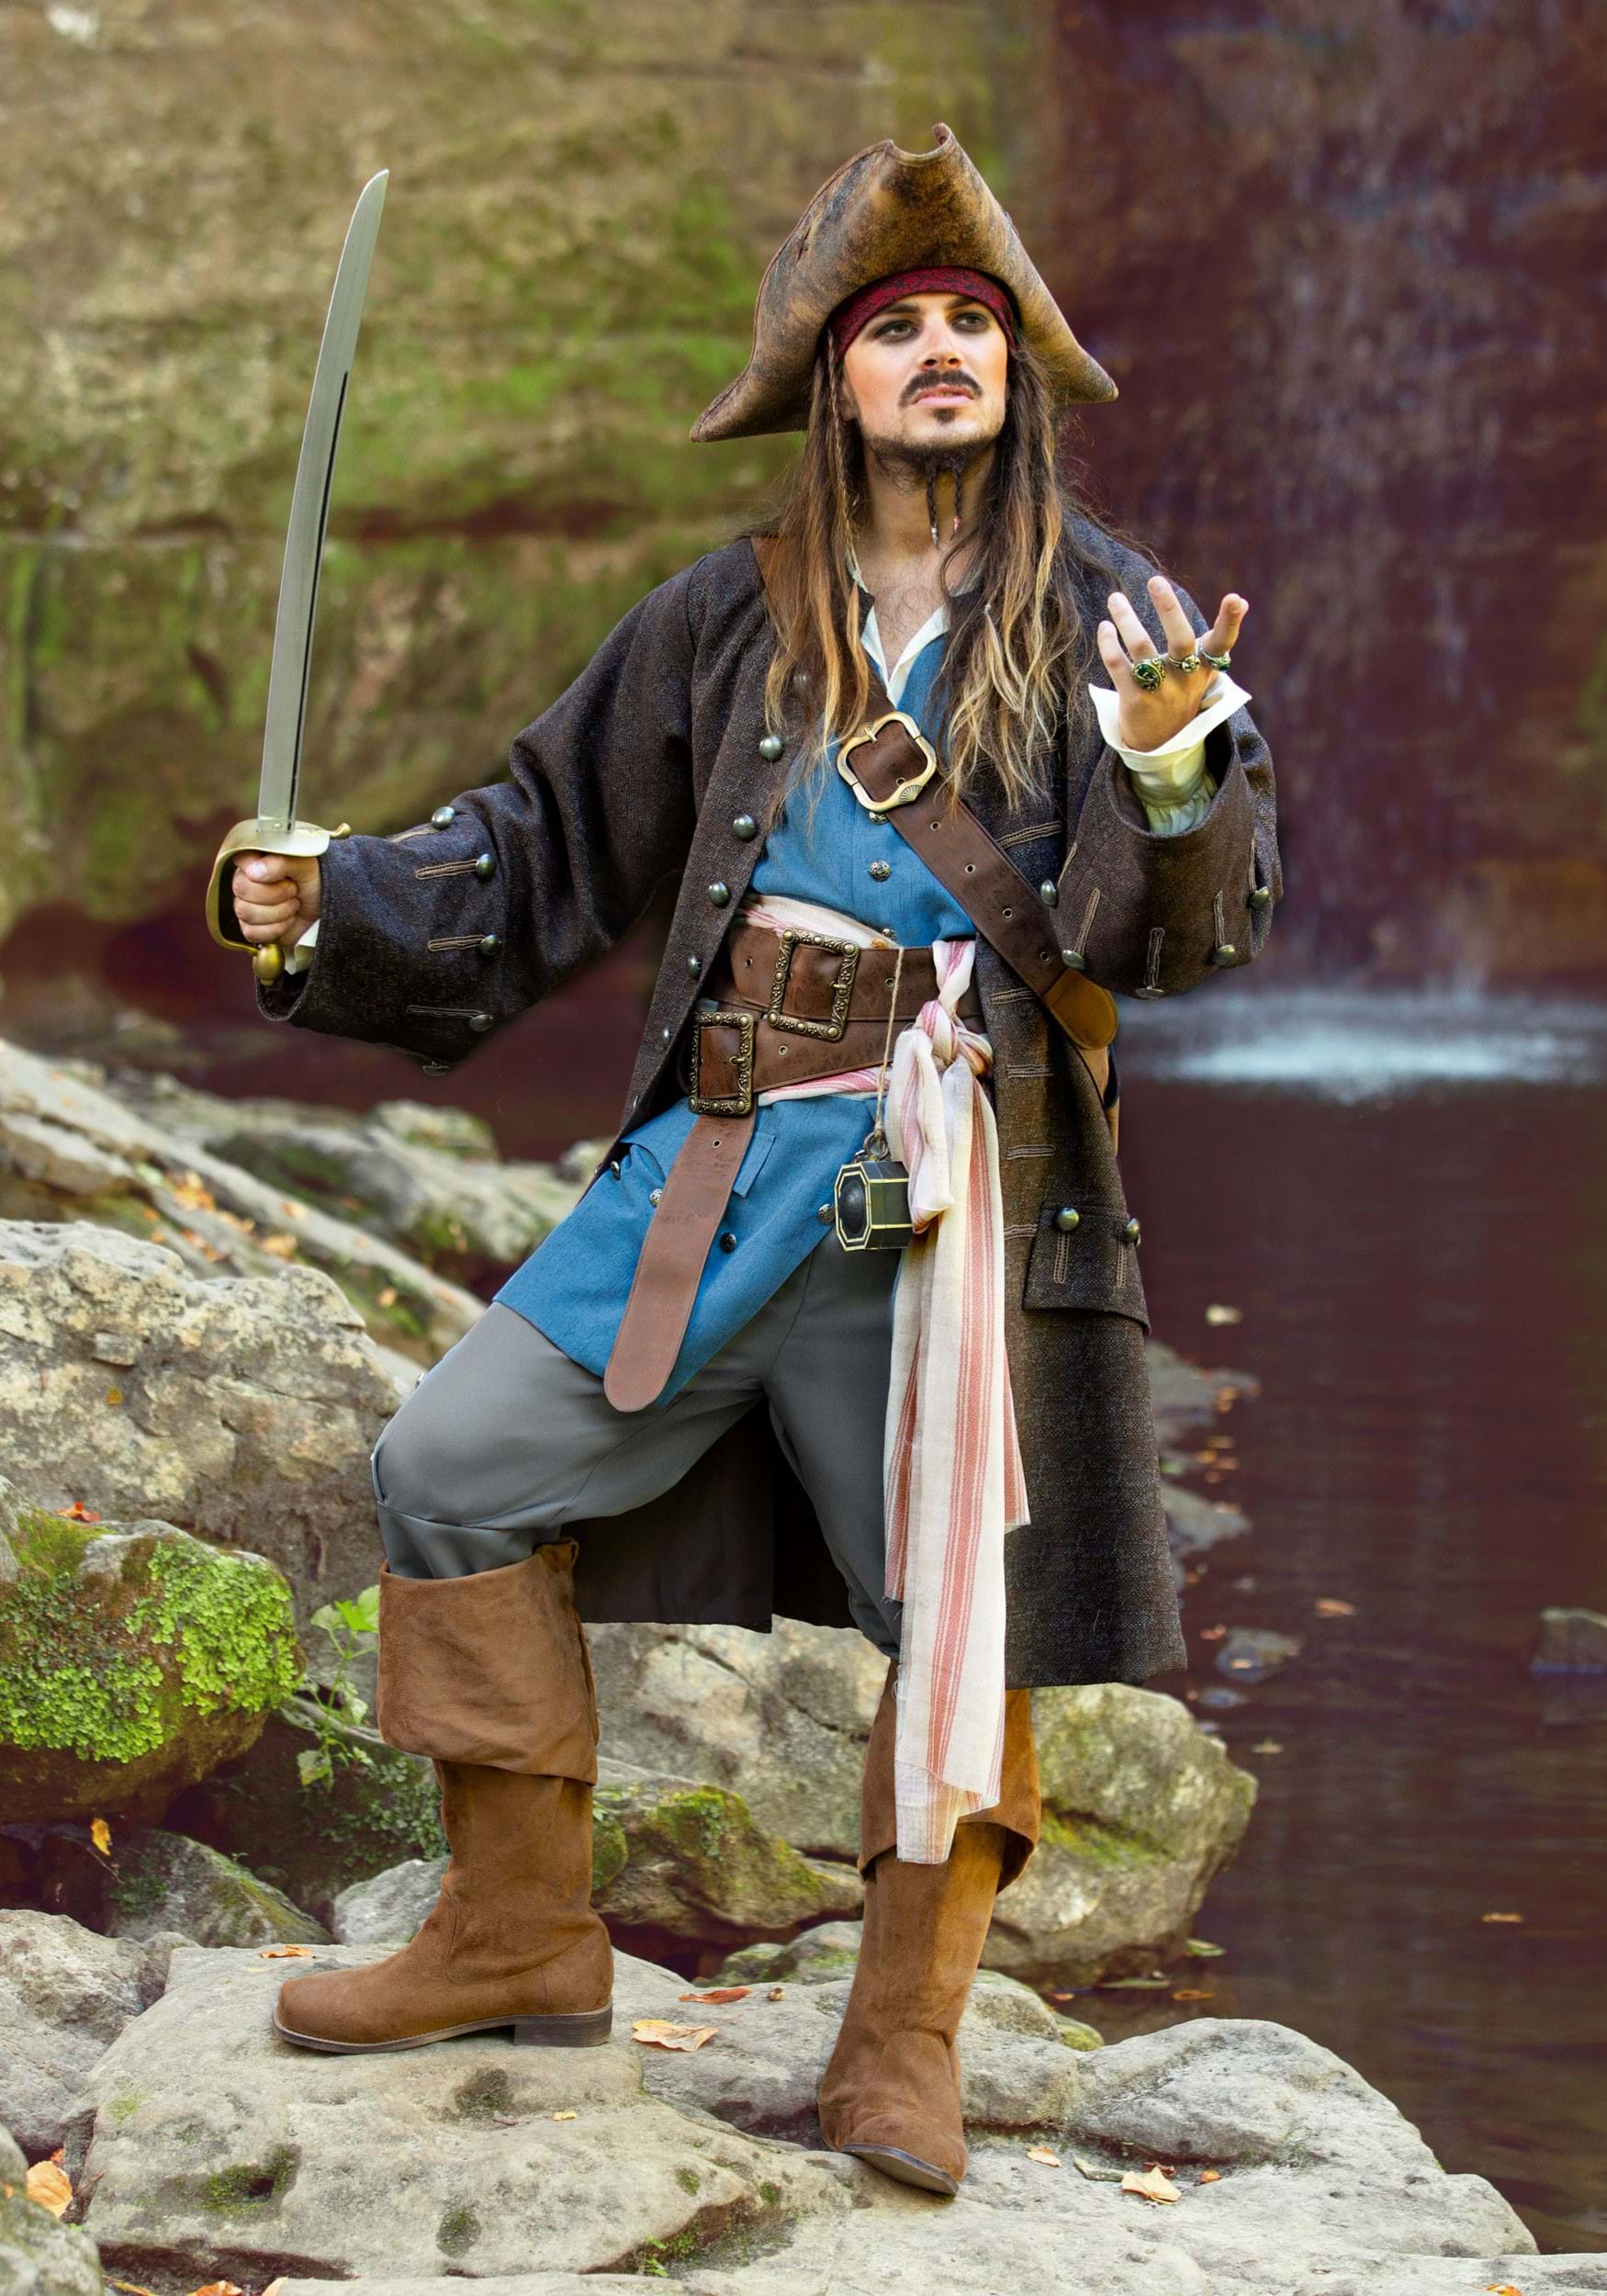 Deluxe Posh PIRATE - Captain Hook / Jack Sparrow - THE FULL LOOK